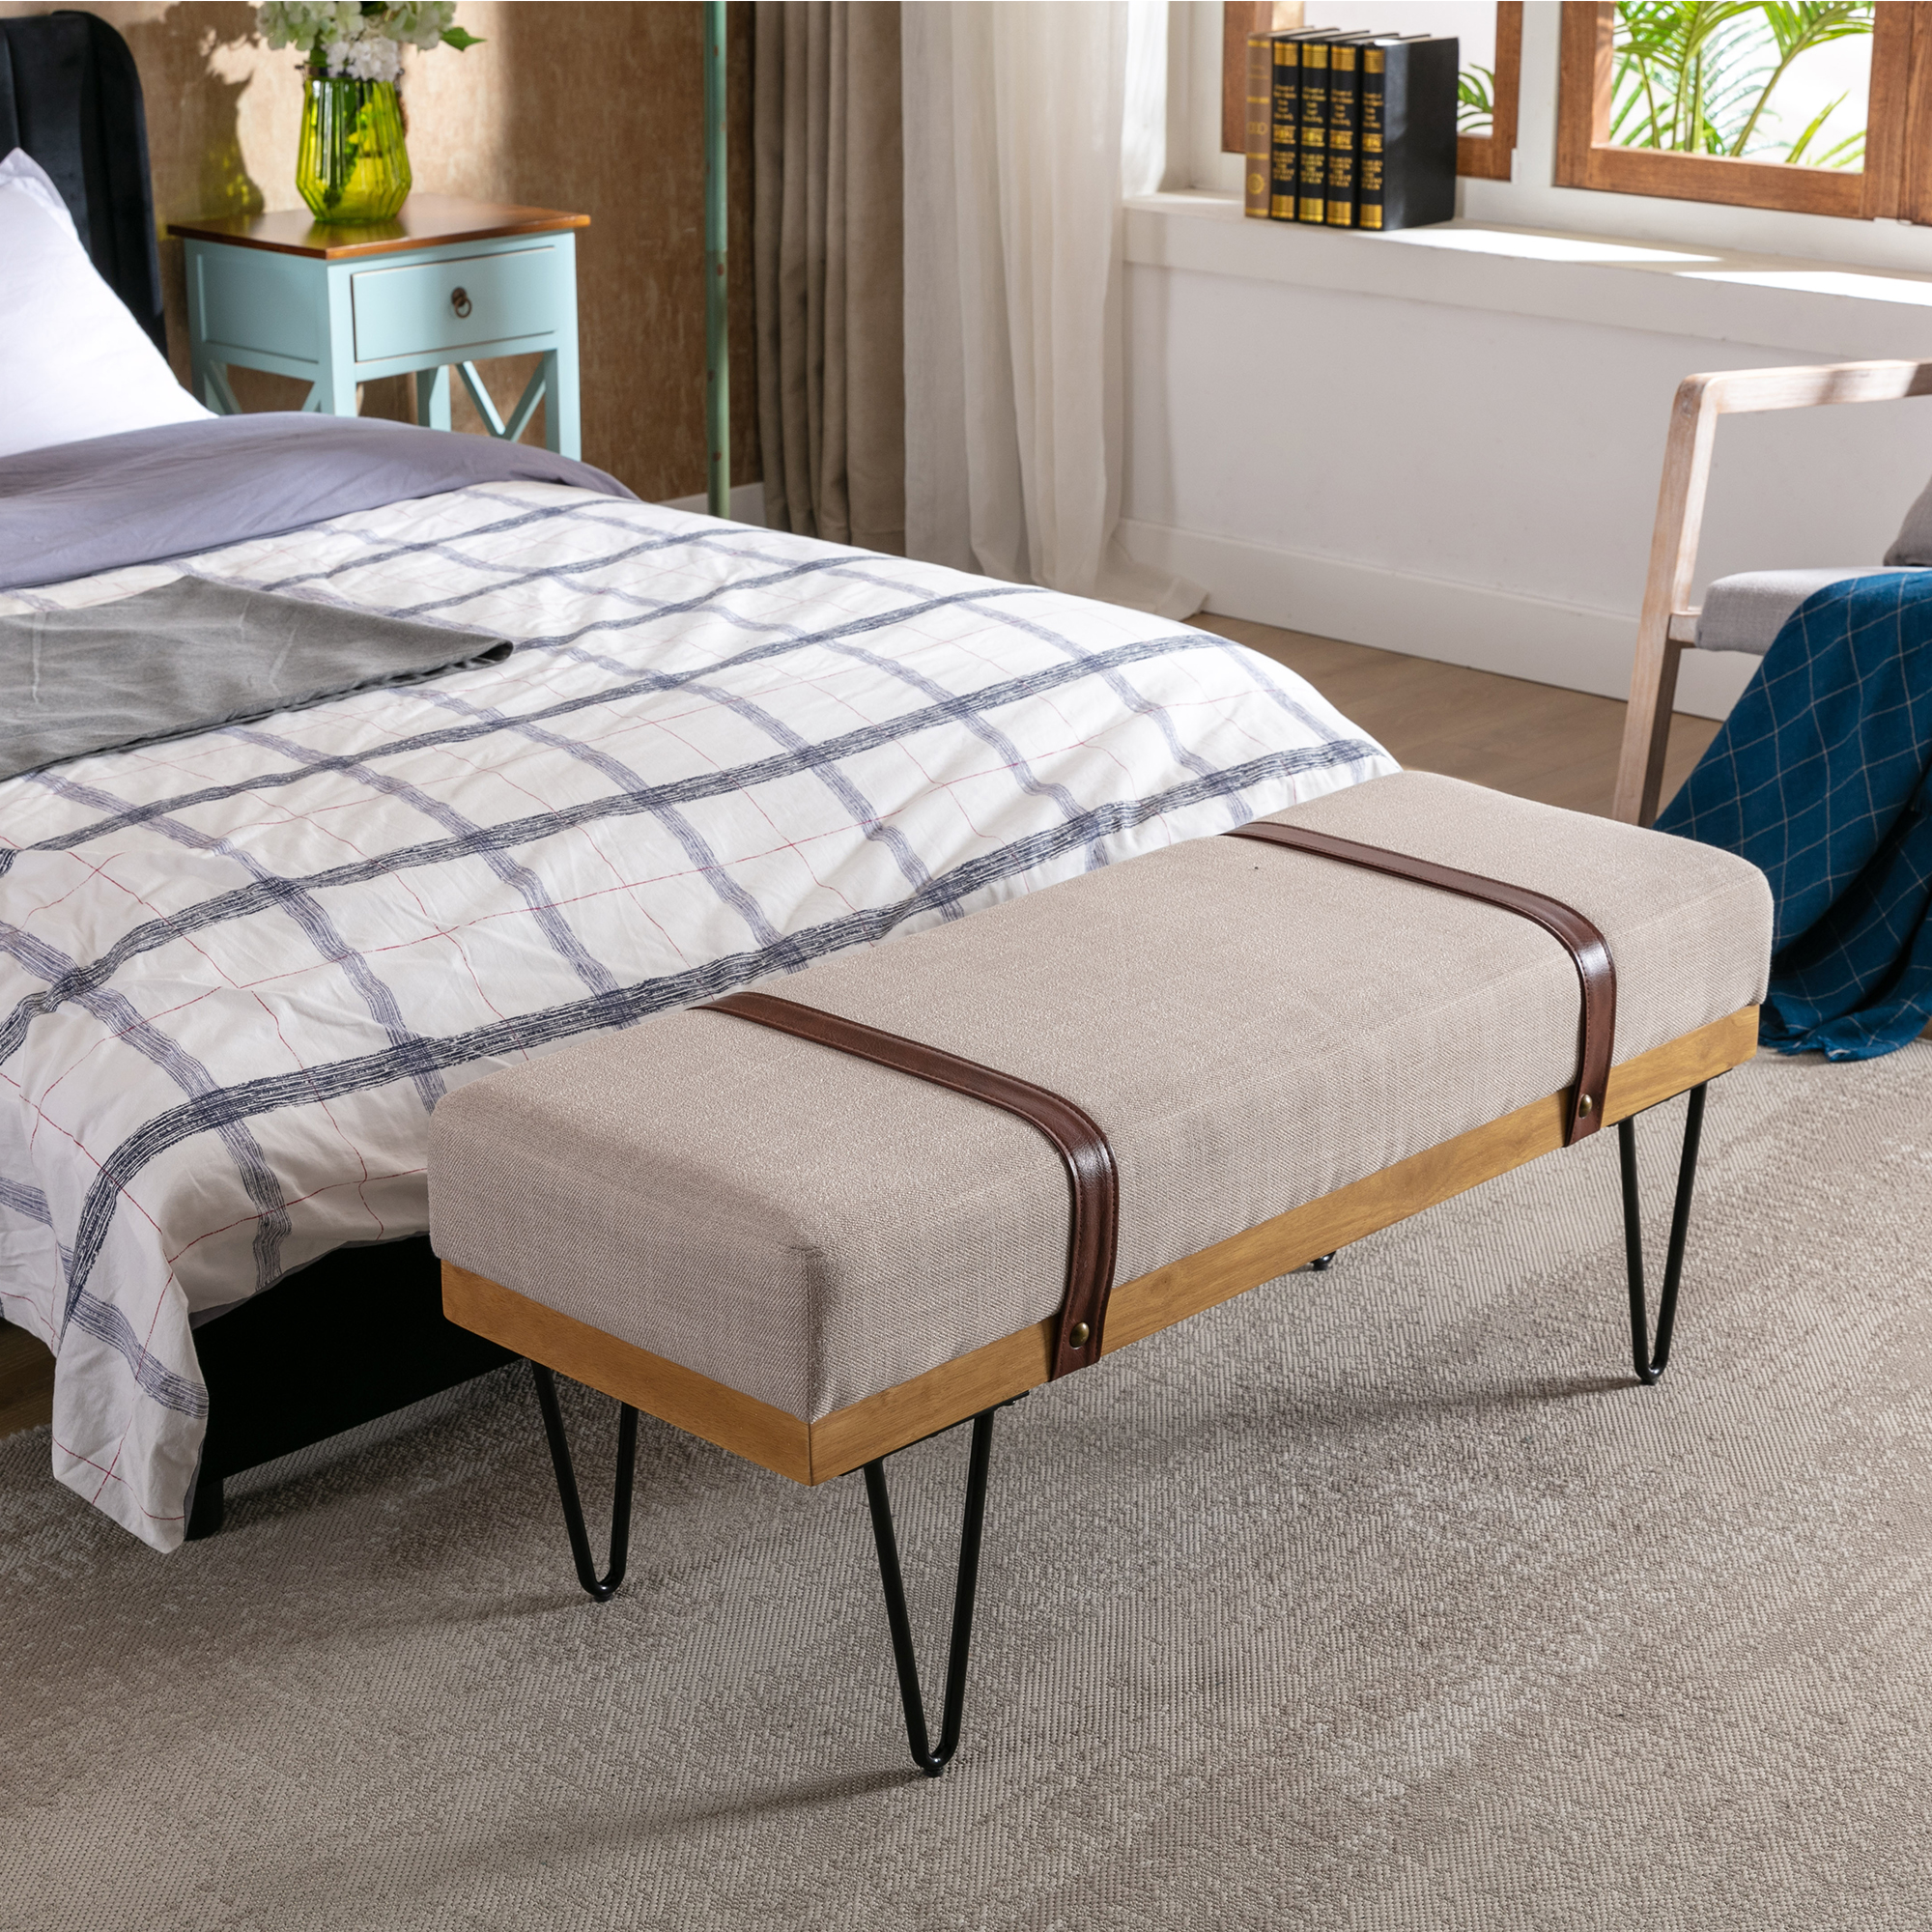 Linen Fabric soft cushion Upholstered solid wood frame Rectangle bed bench with powder coating metal legs ,Entryway footstool-Boyel Living